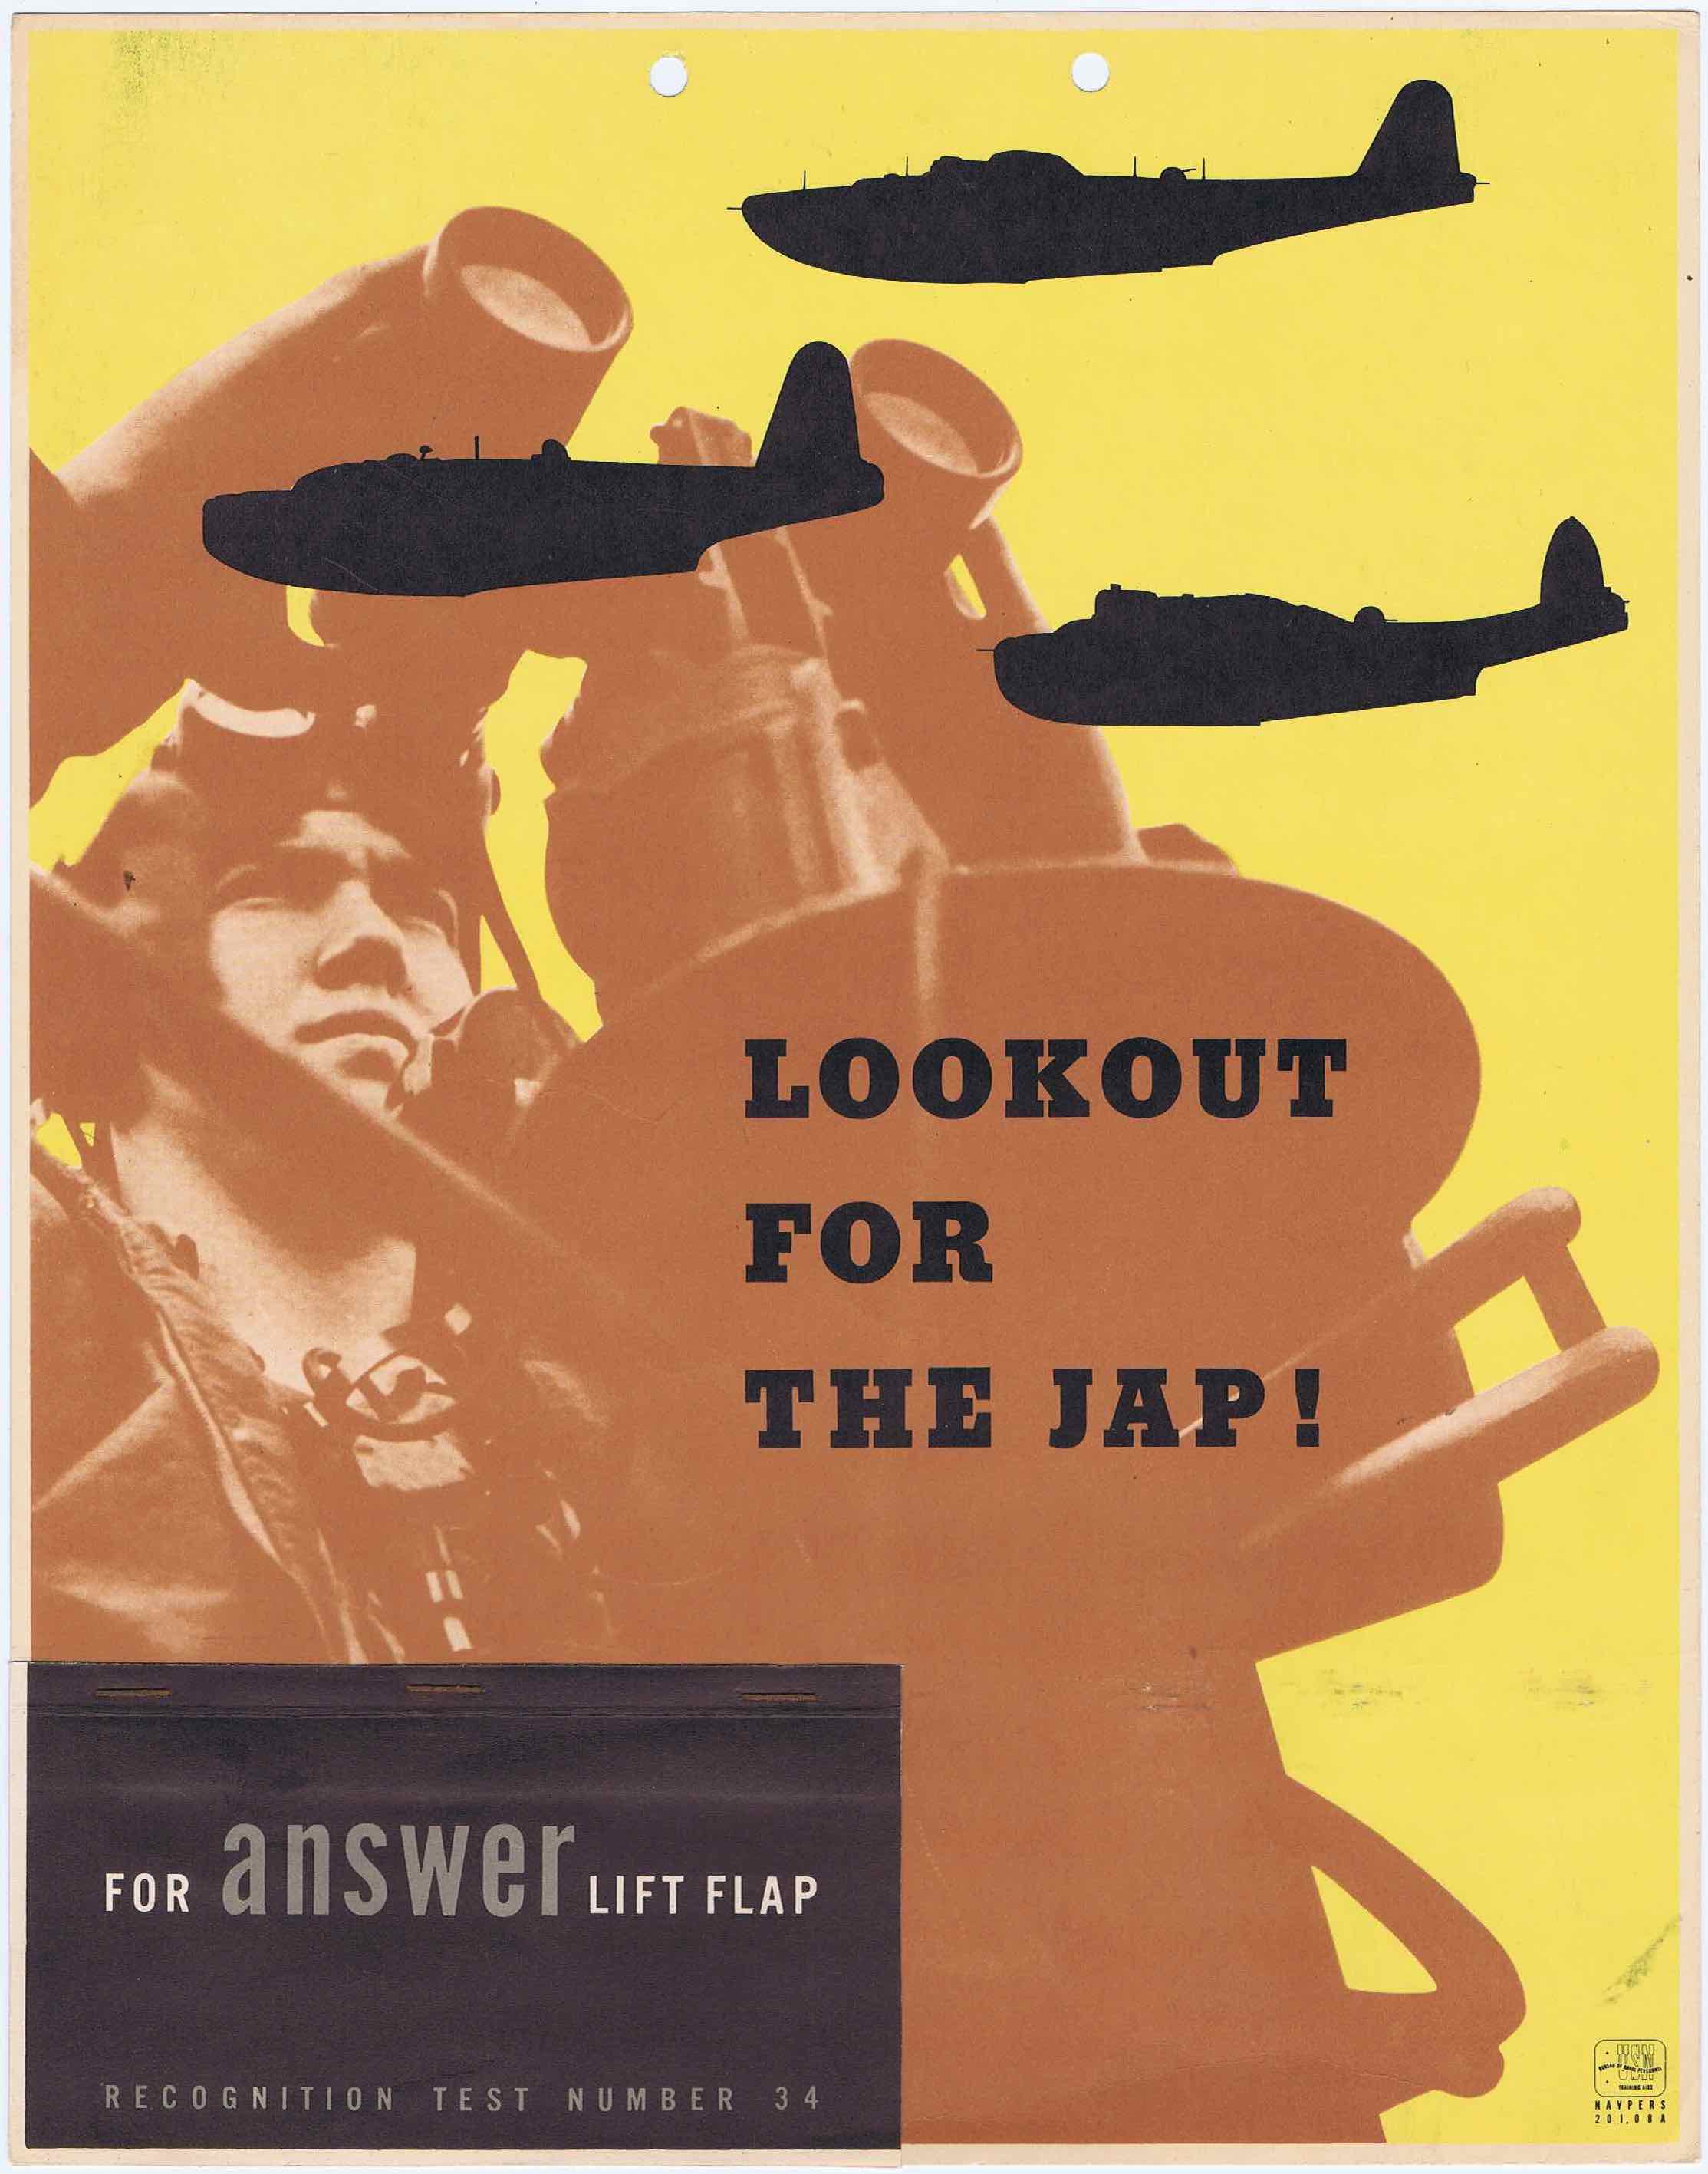 J315	LOOKOUT FOR THE JAP! - U.S. ARMY AIR FORCE RECOGNITION POSTER